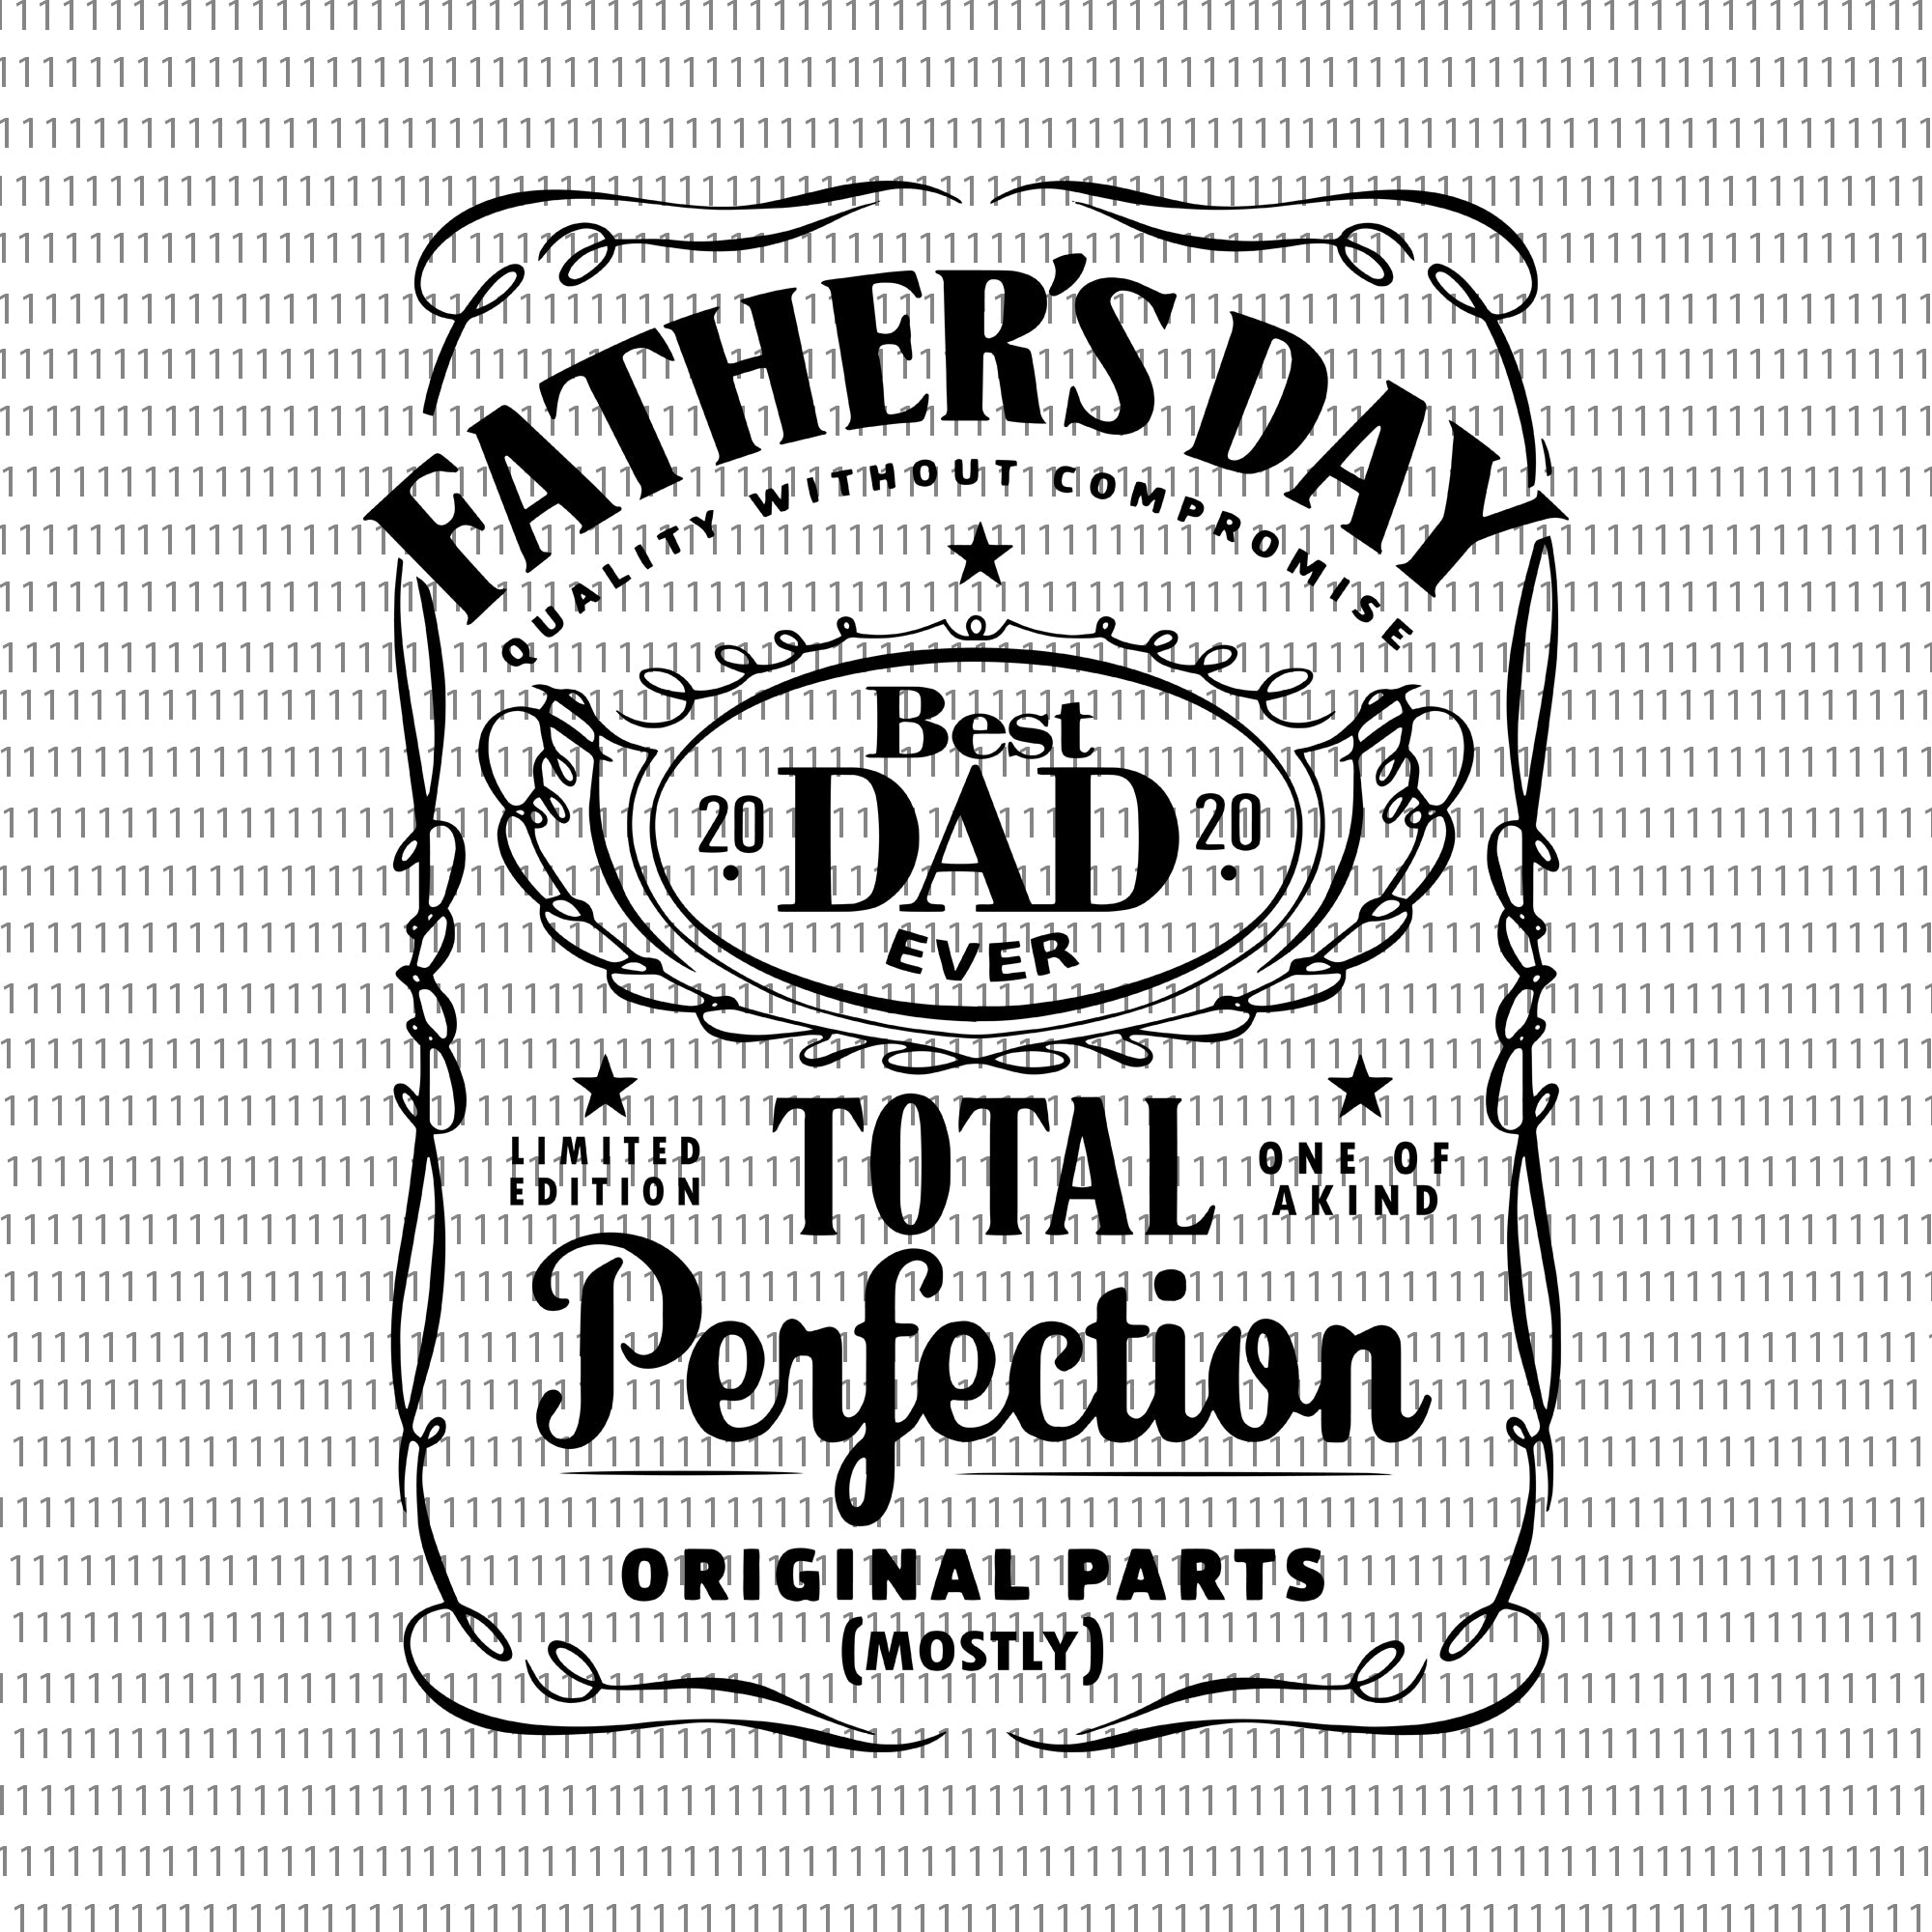 Father's Day SVG, Dad SVG, Best Dad, Whiskey Label, Best dad ever 2020 svg, best dad ever, dad 2020, dad 2020 svg, father day svg